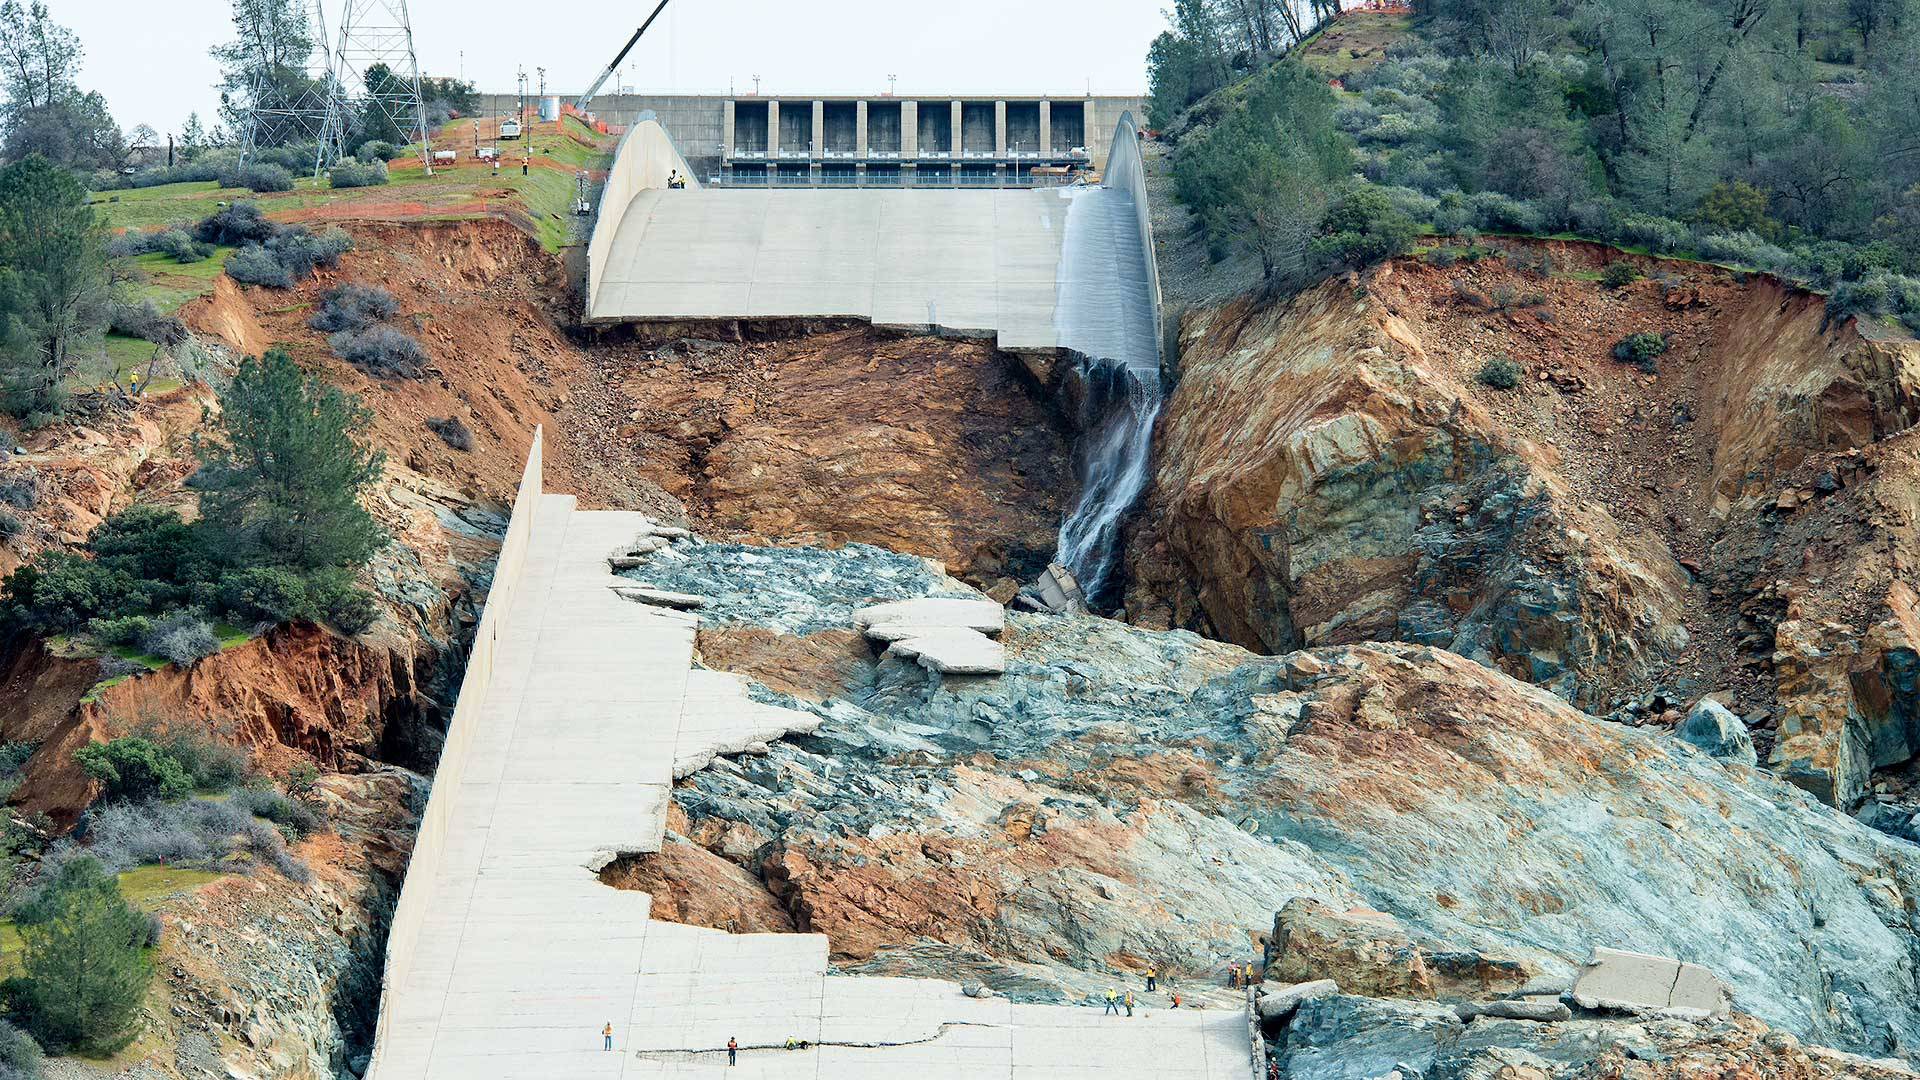 Report: Flaws in Design, Building and Upkeep Led to Oroville Spillway Failure